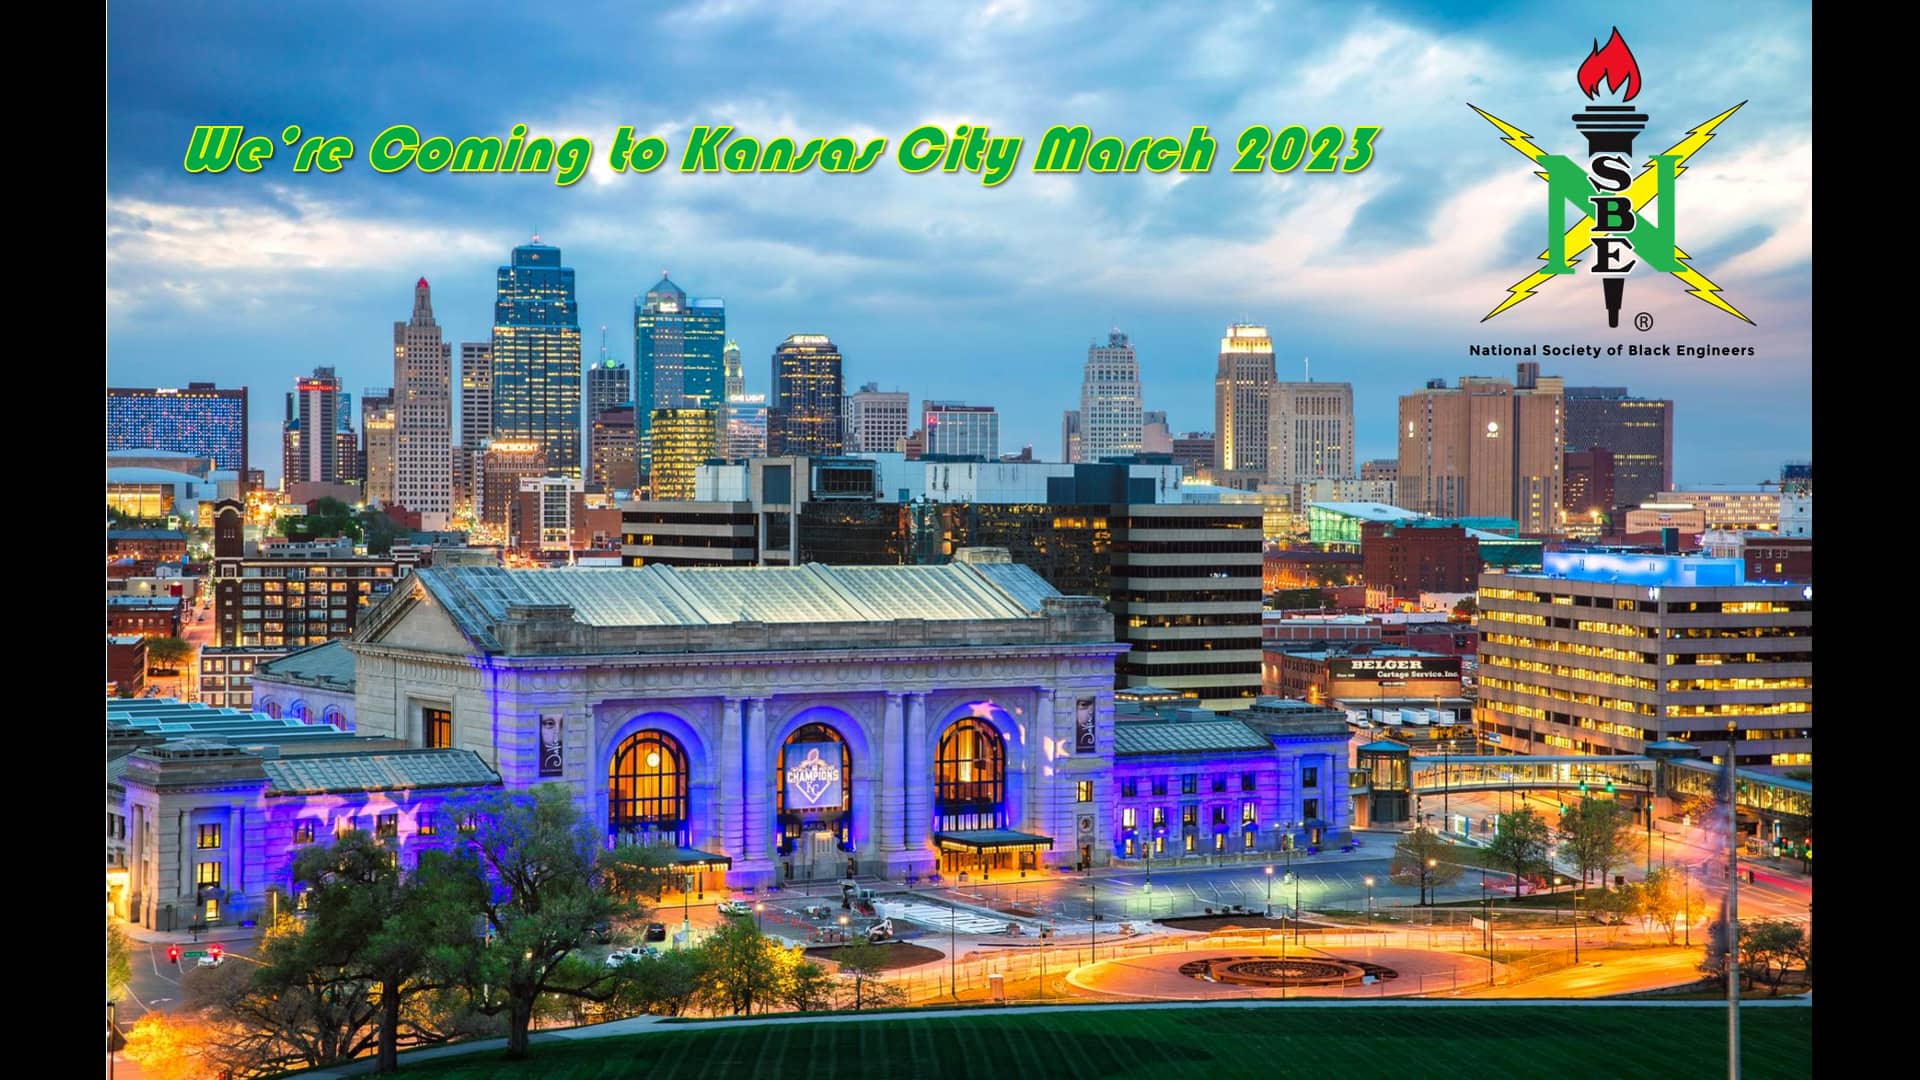 NSBE 49th Annual Convention Kansas City Luncheon with Janeen Uzzell on